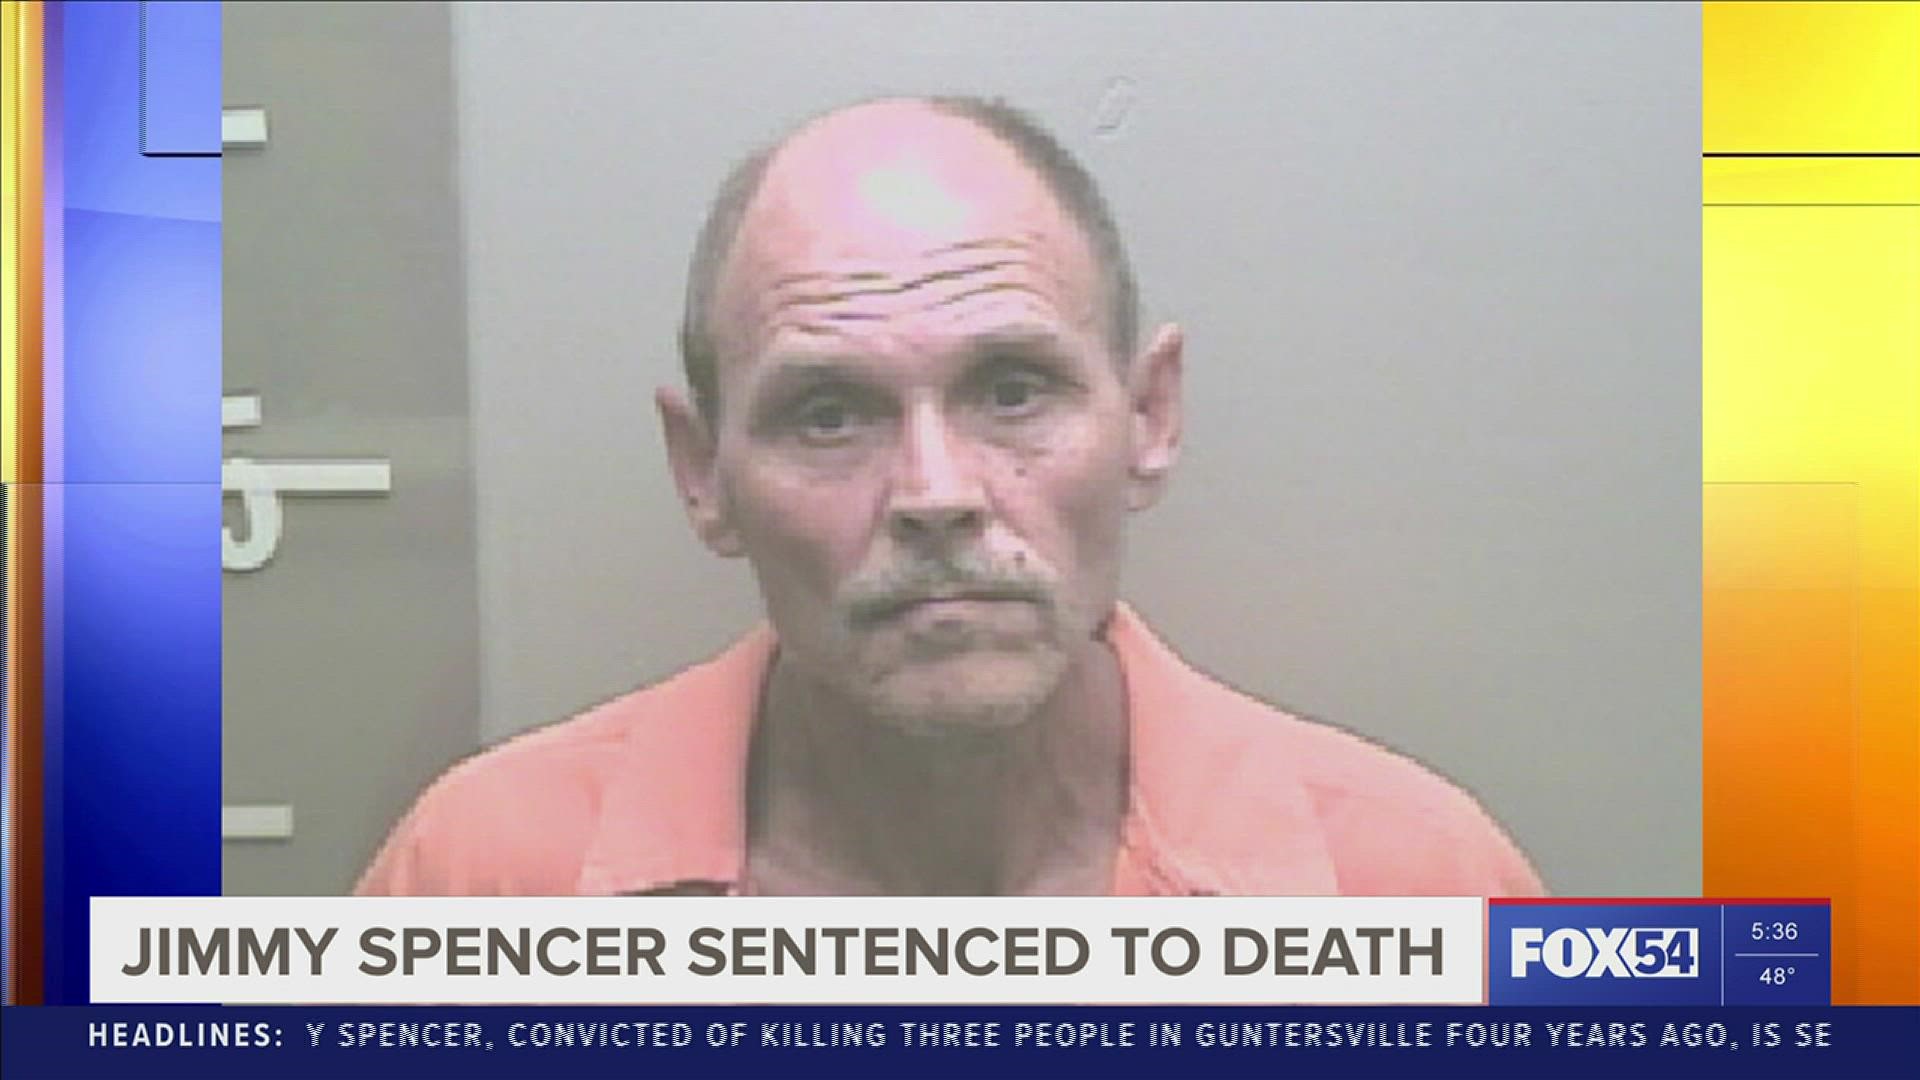 Last month a Marshall County jury voted to sentence Jimmy Spencer to death for killing three people in Guntersville four years ago. Today the judge agreed.